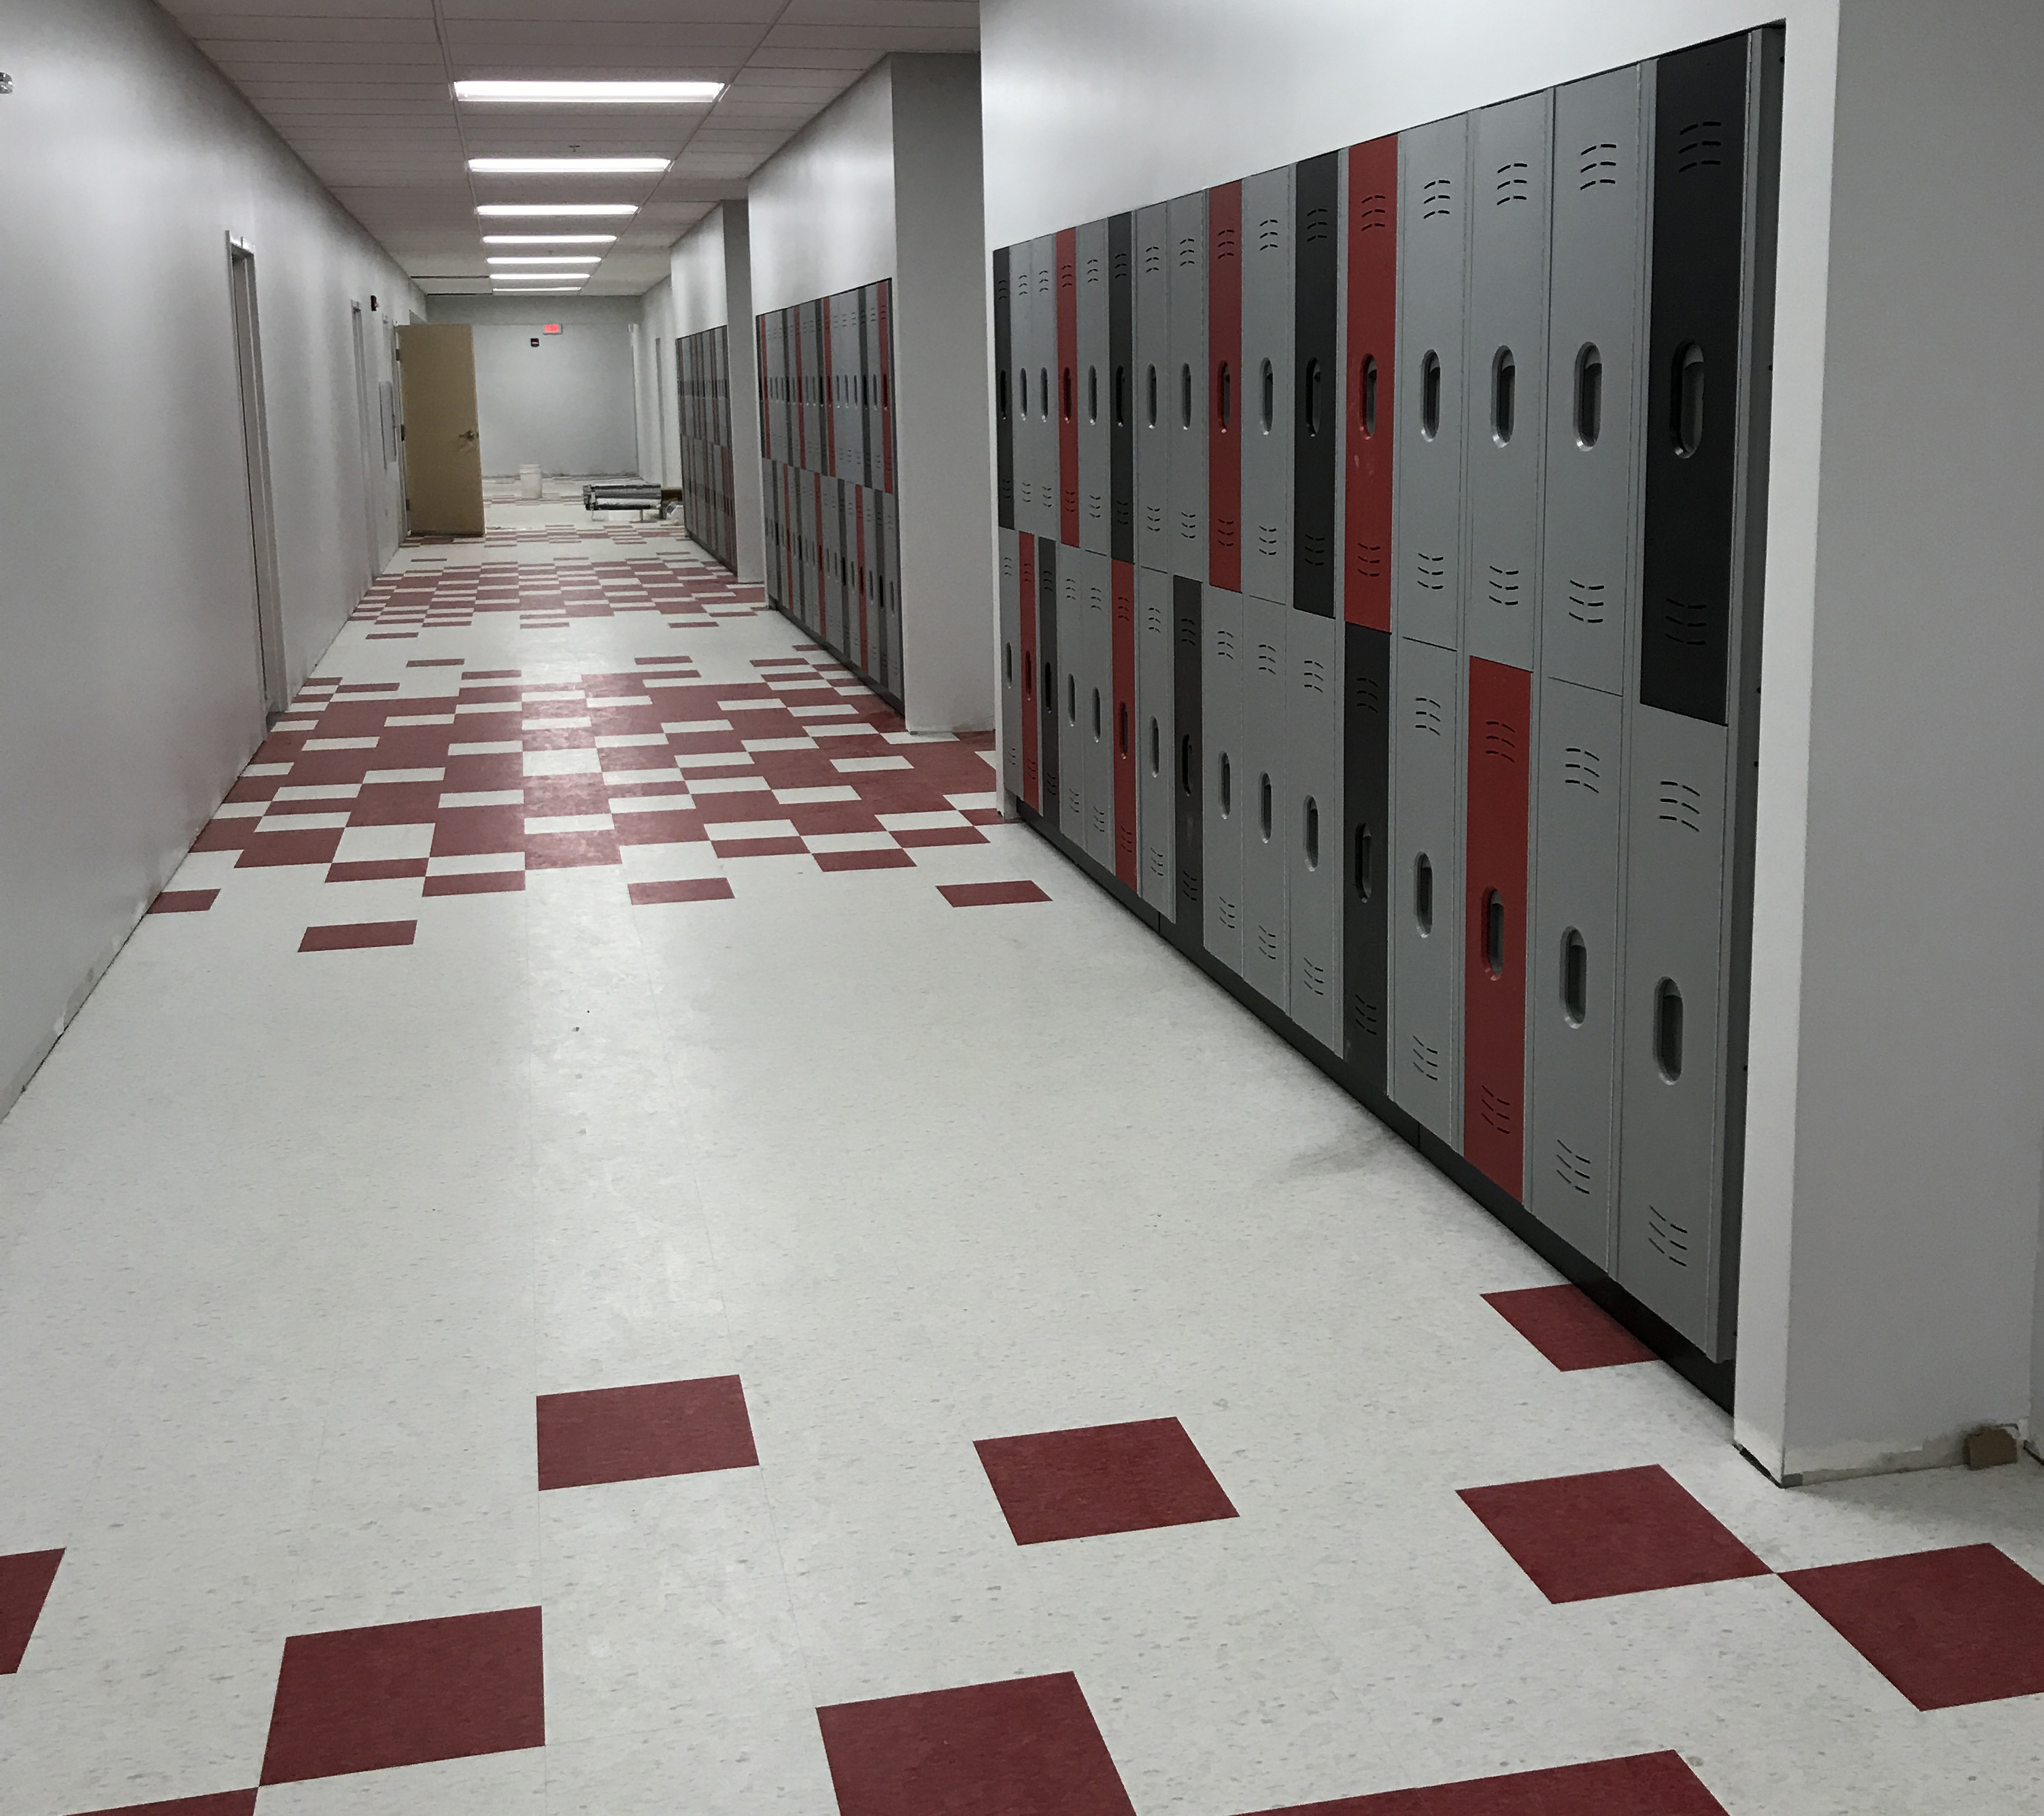 The Duralife lockers offer a space saving design and fun color scheme that matches the Memphis Rise Academy's colors.